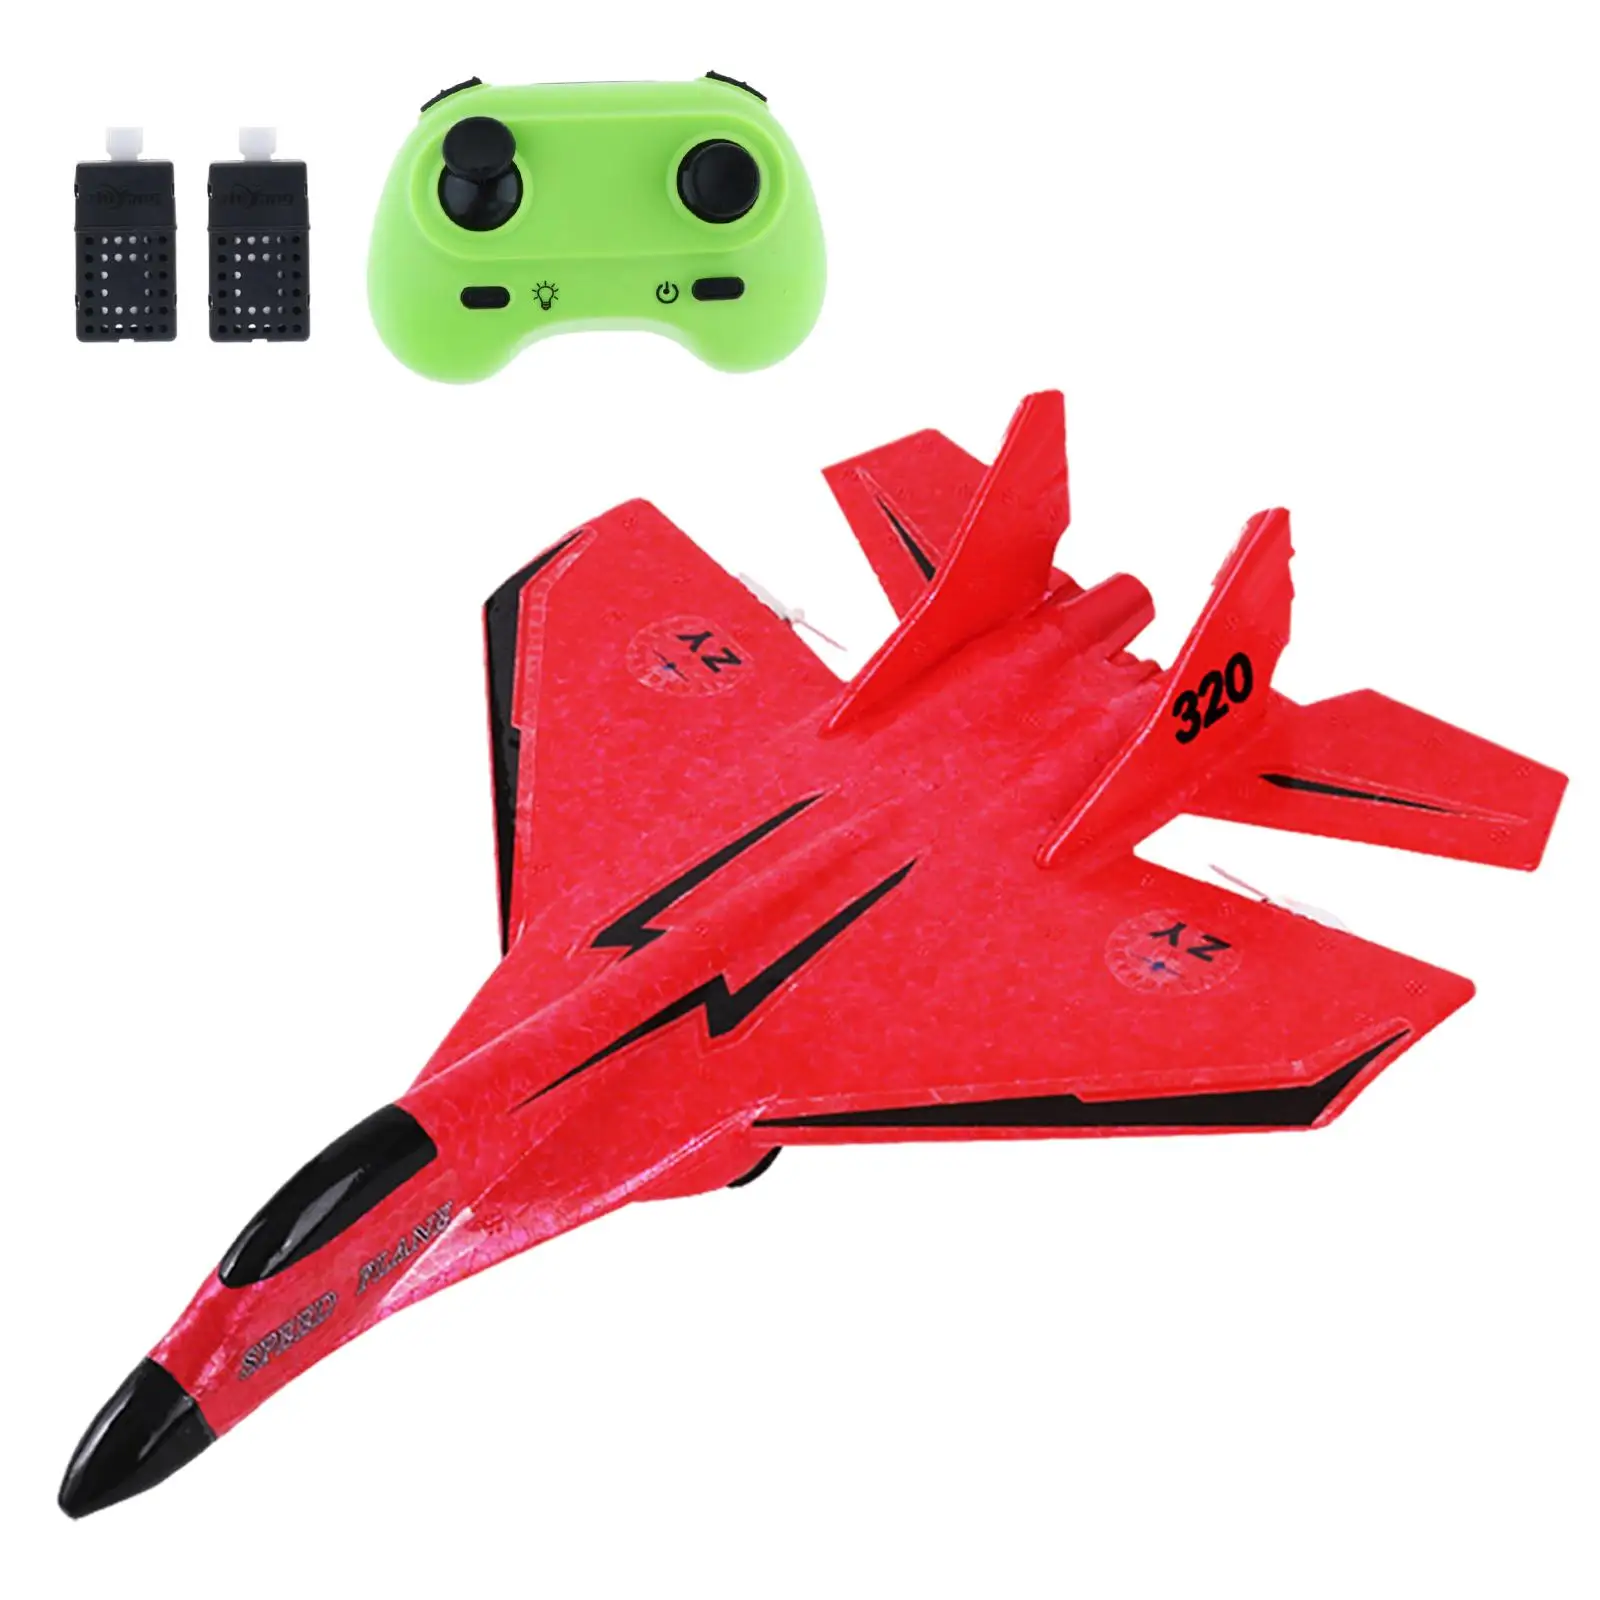 RC Plane Lightweight Portable 2 Channel RC Glider for Boys Girls Adults Kids